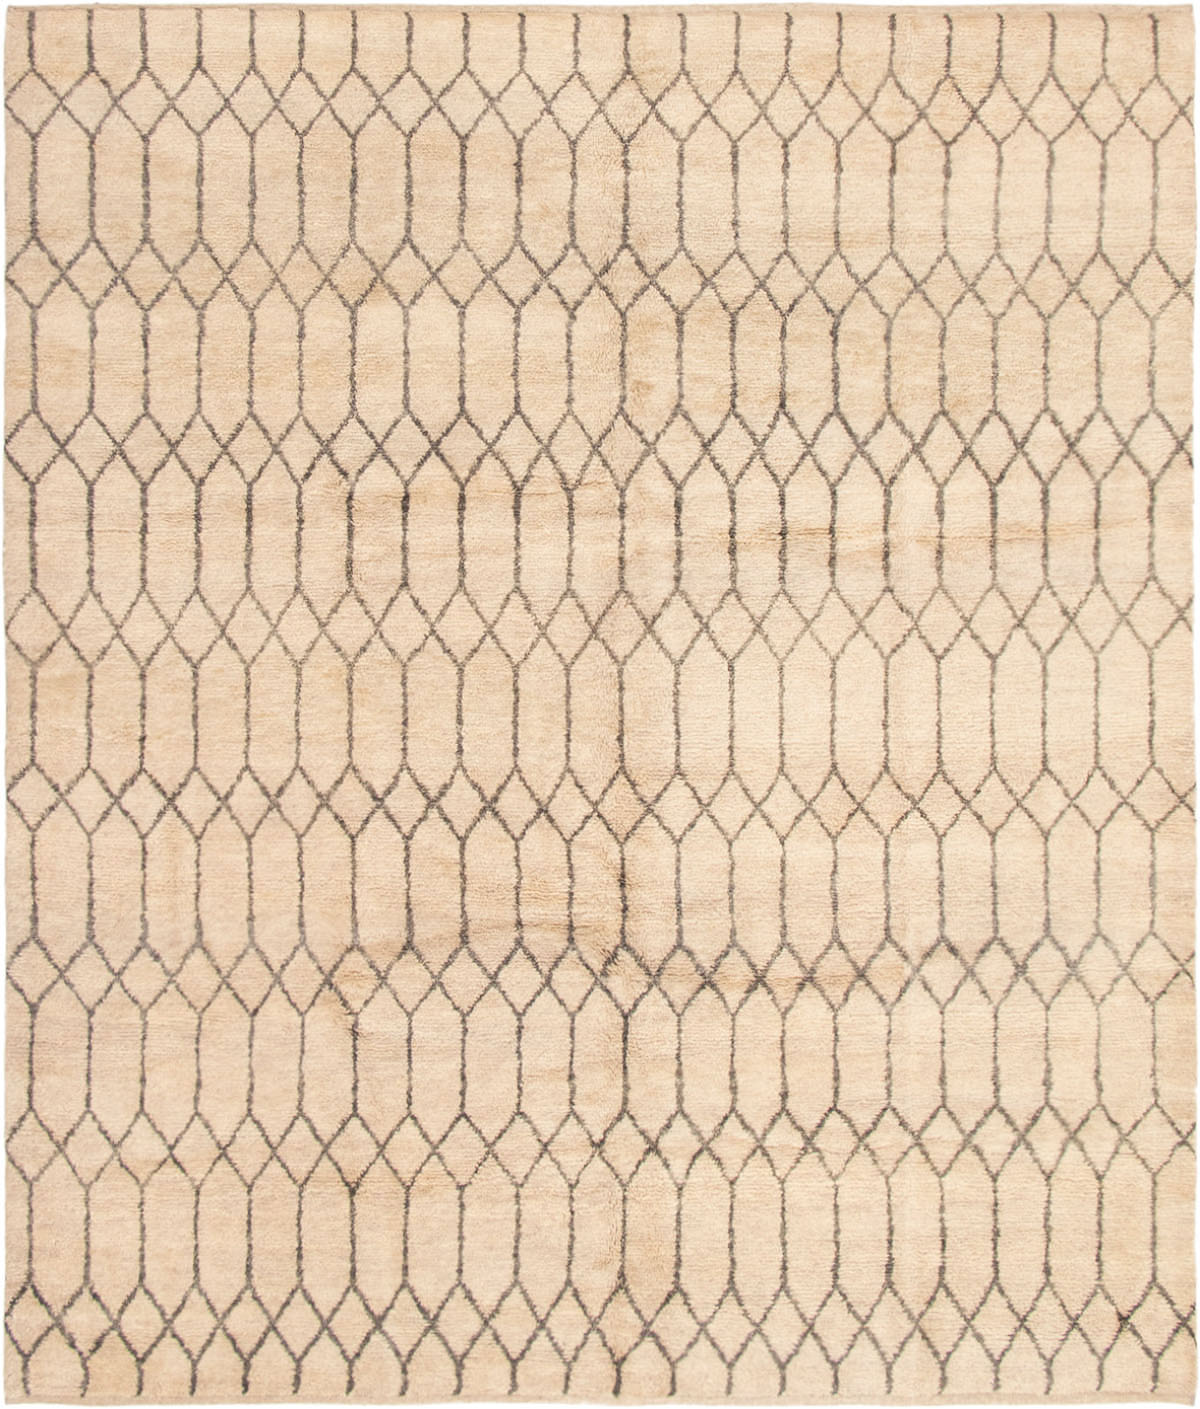 Hand-knotted Arlequin Beige Wool Rug 8'5" x 9'10" Size: 8'5" x 9'10"  